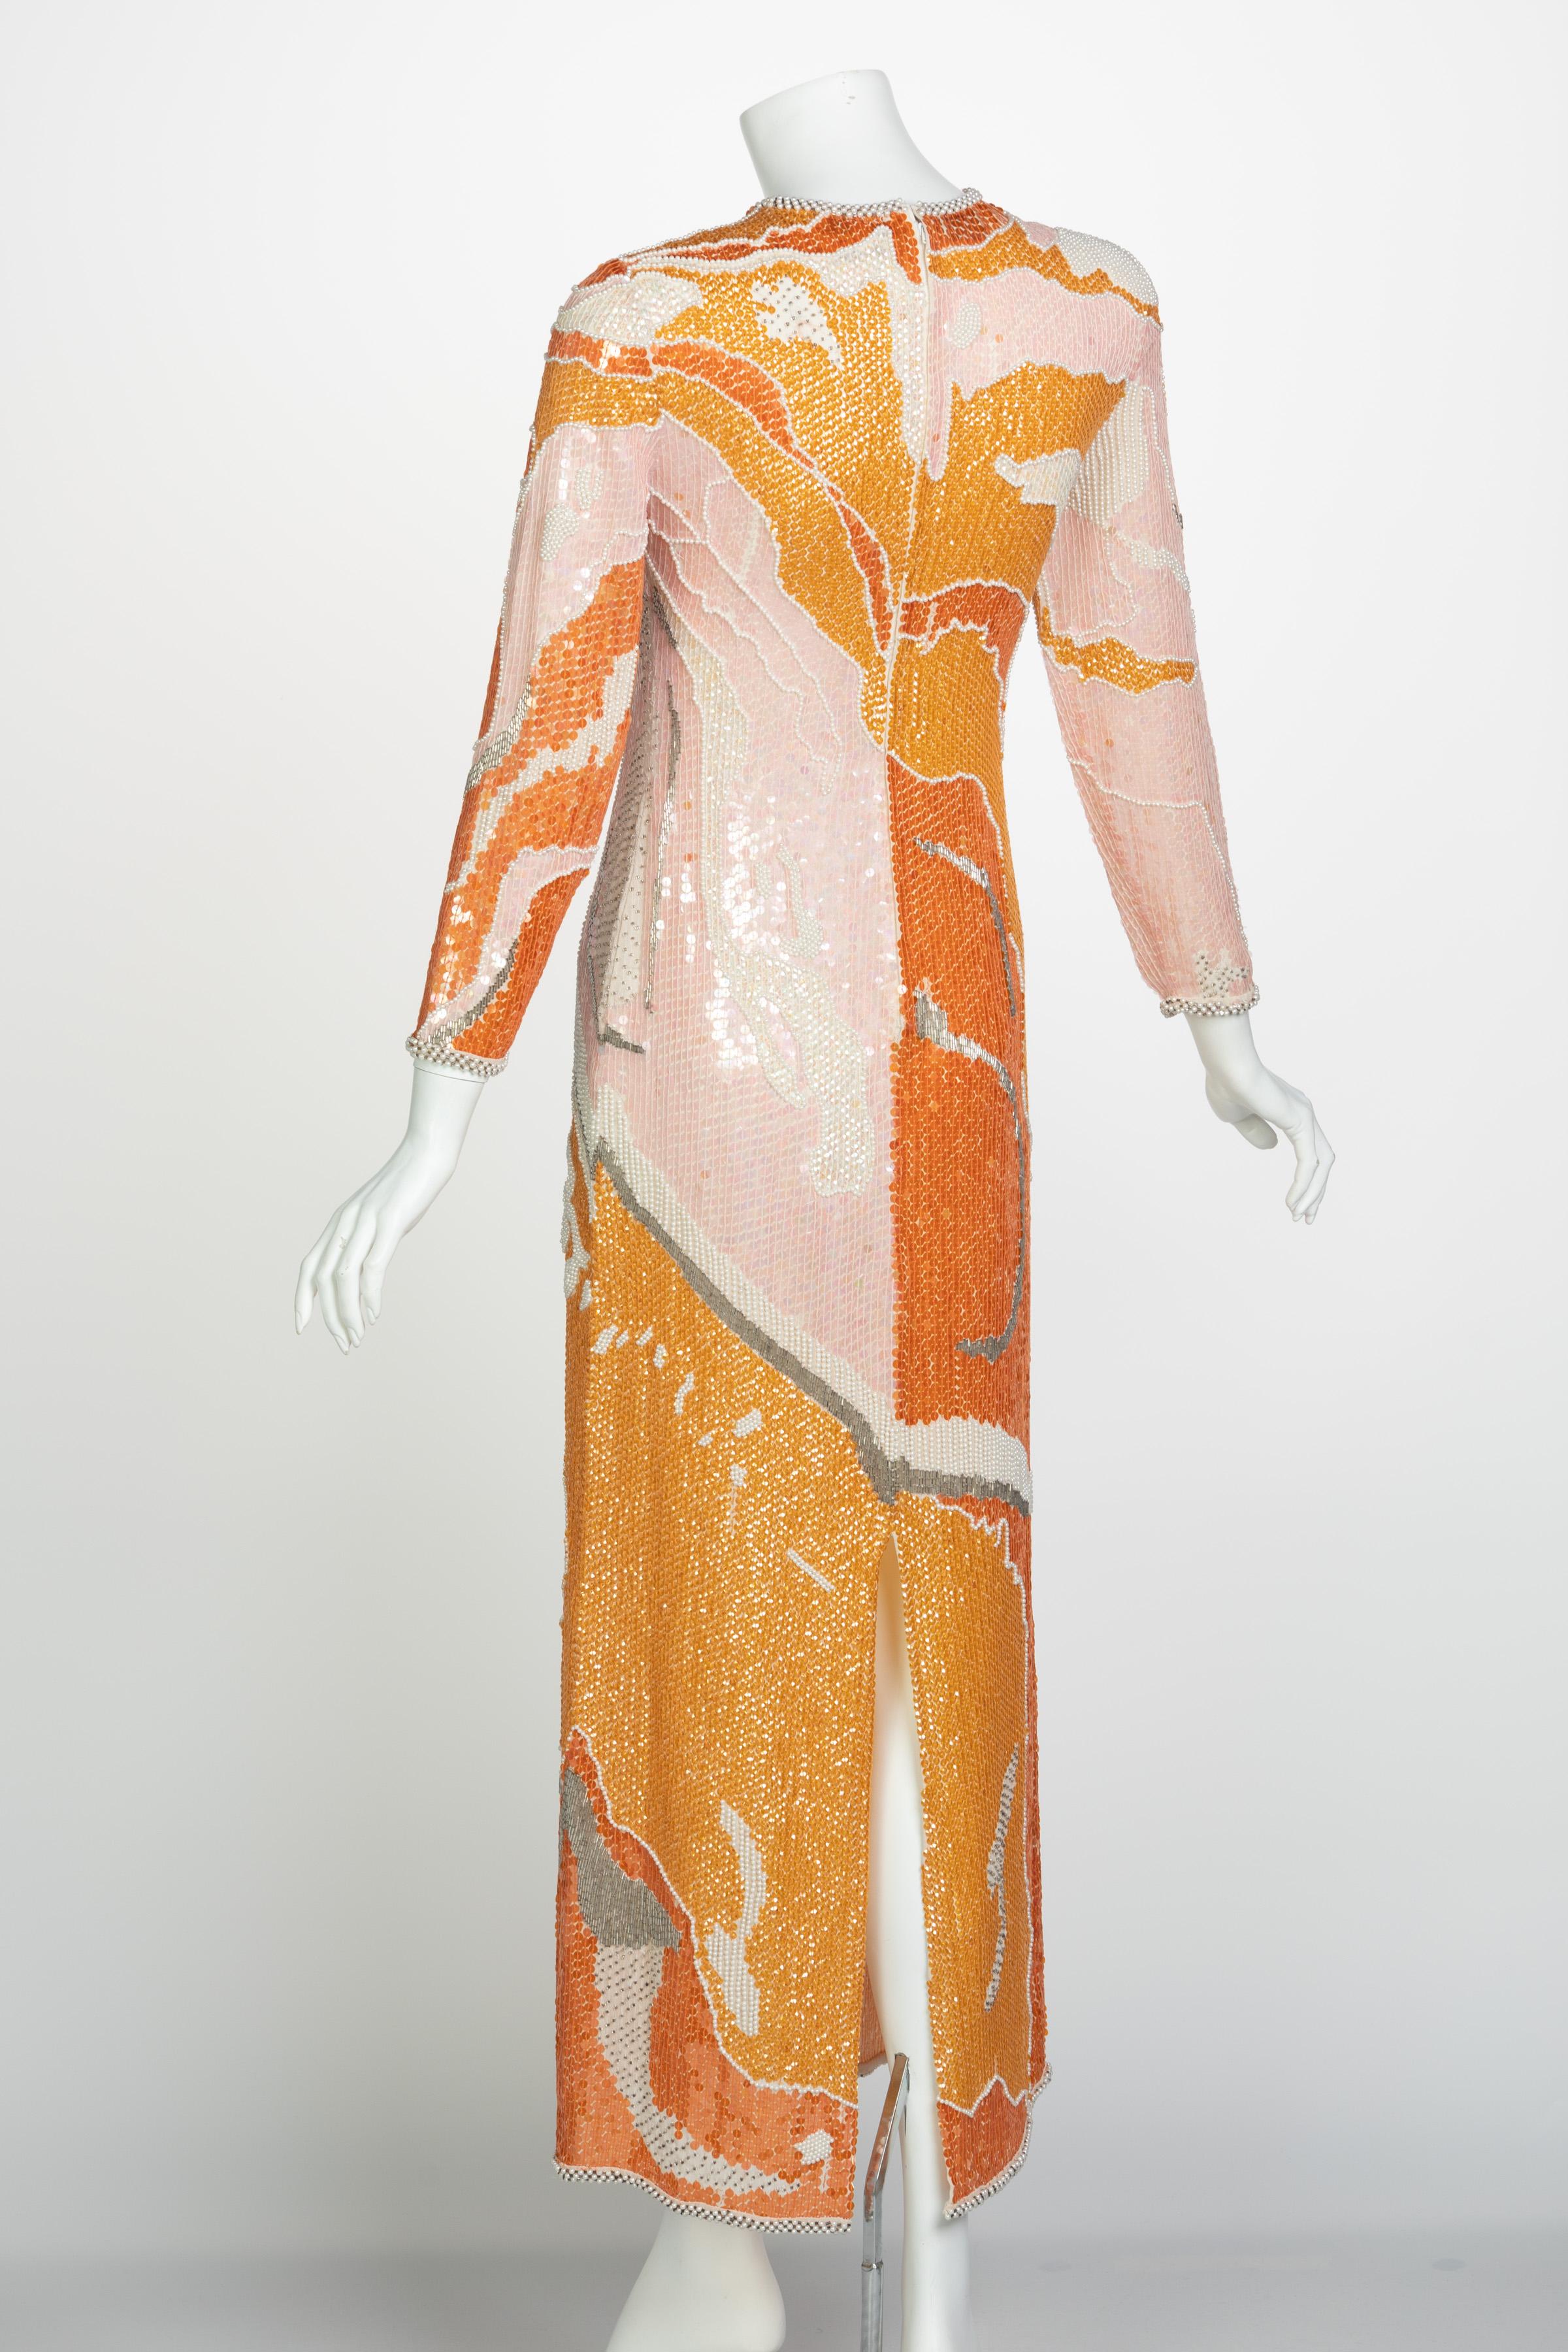 Women's Halston Couture Sequin Pearl Beaded Sunset Colors Dress Documented, 1980s